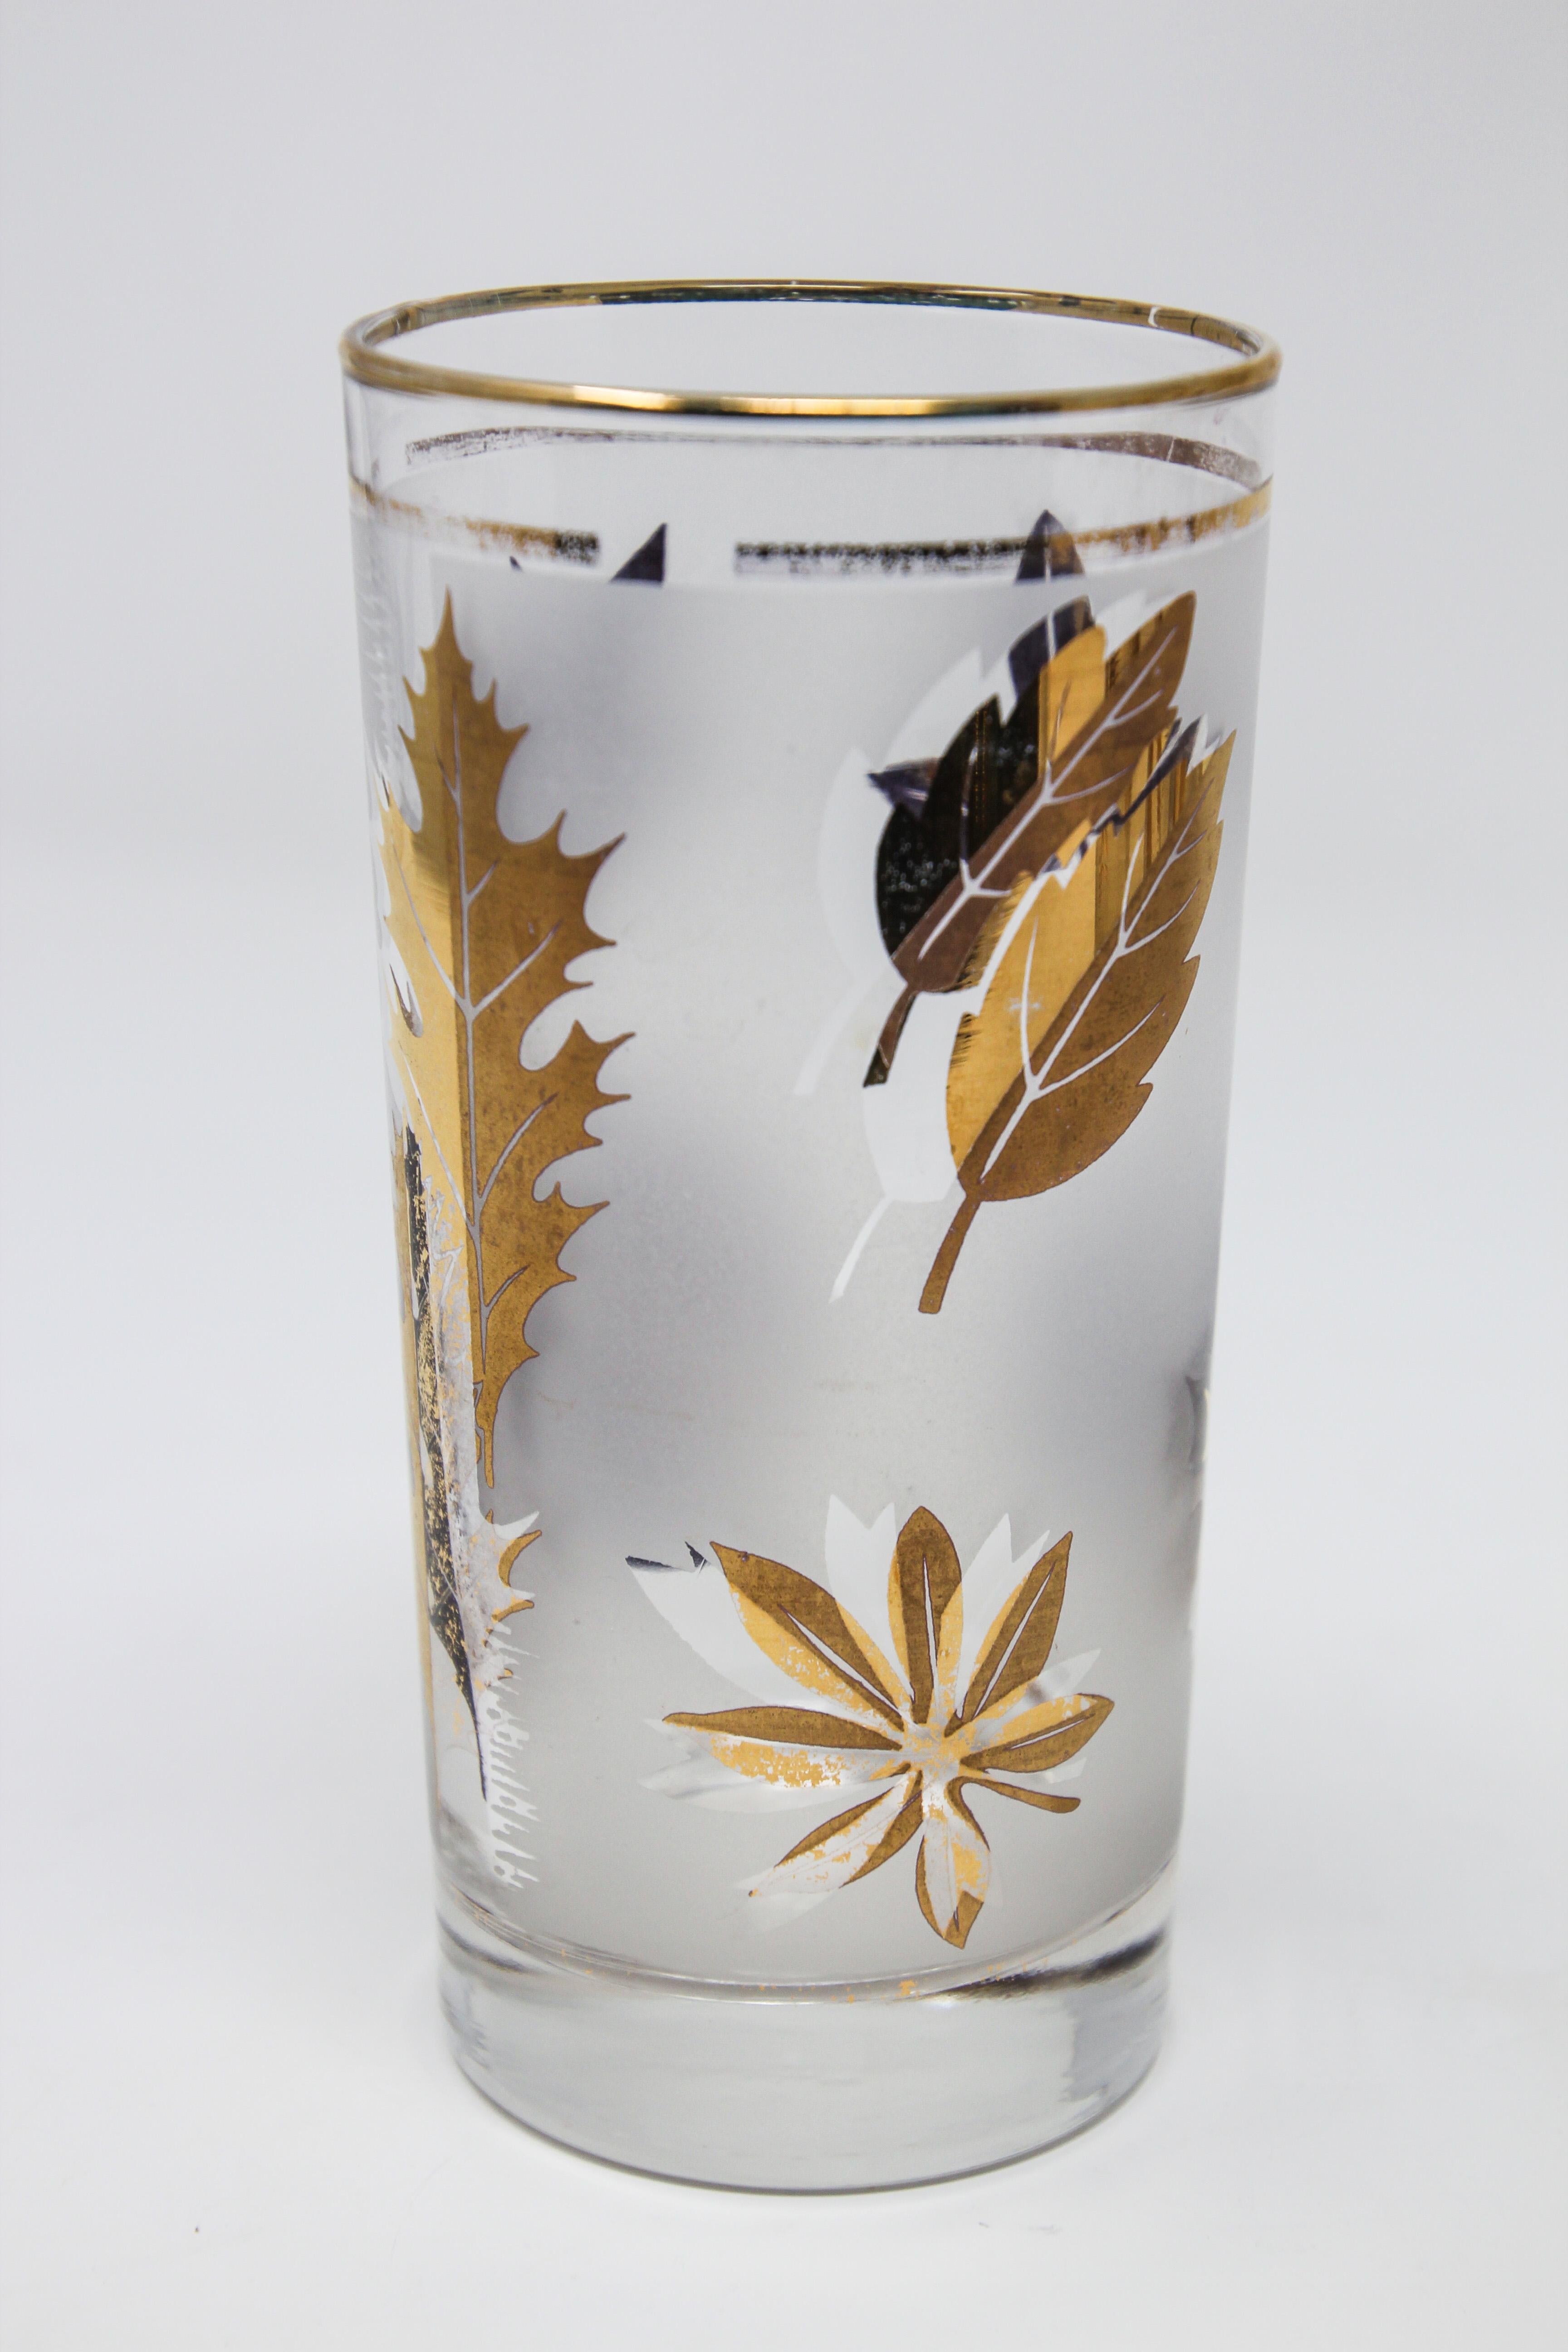 Set of Four Vintage Cocktail Glasses by Libbey with Gold Leaf Design In Good Condition For Sale In North Hollywood, CA